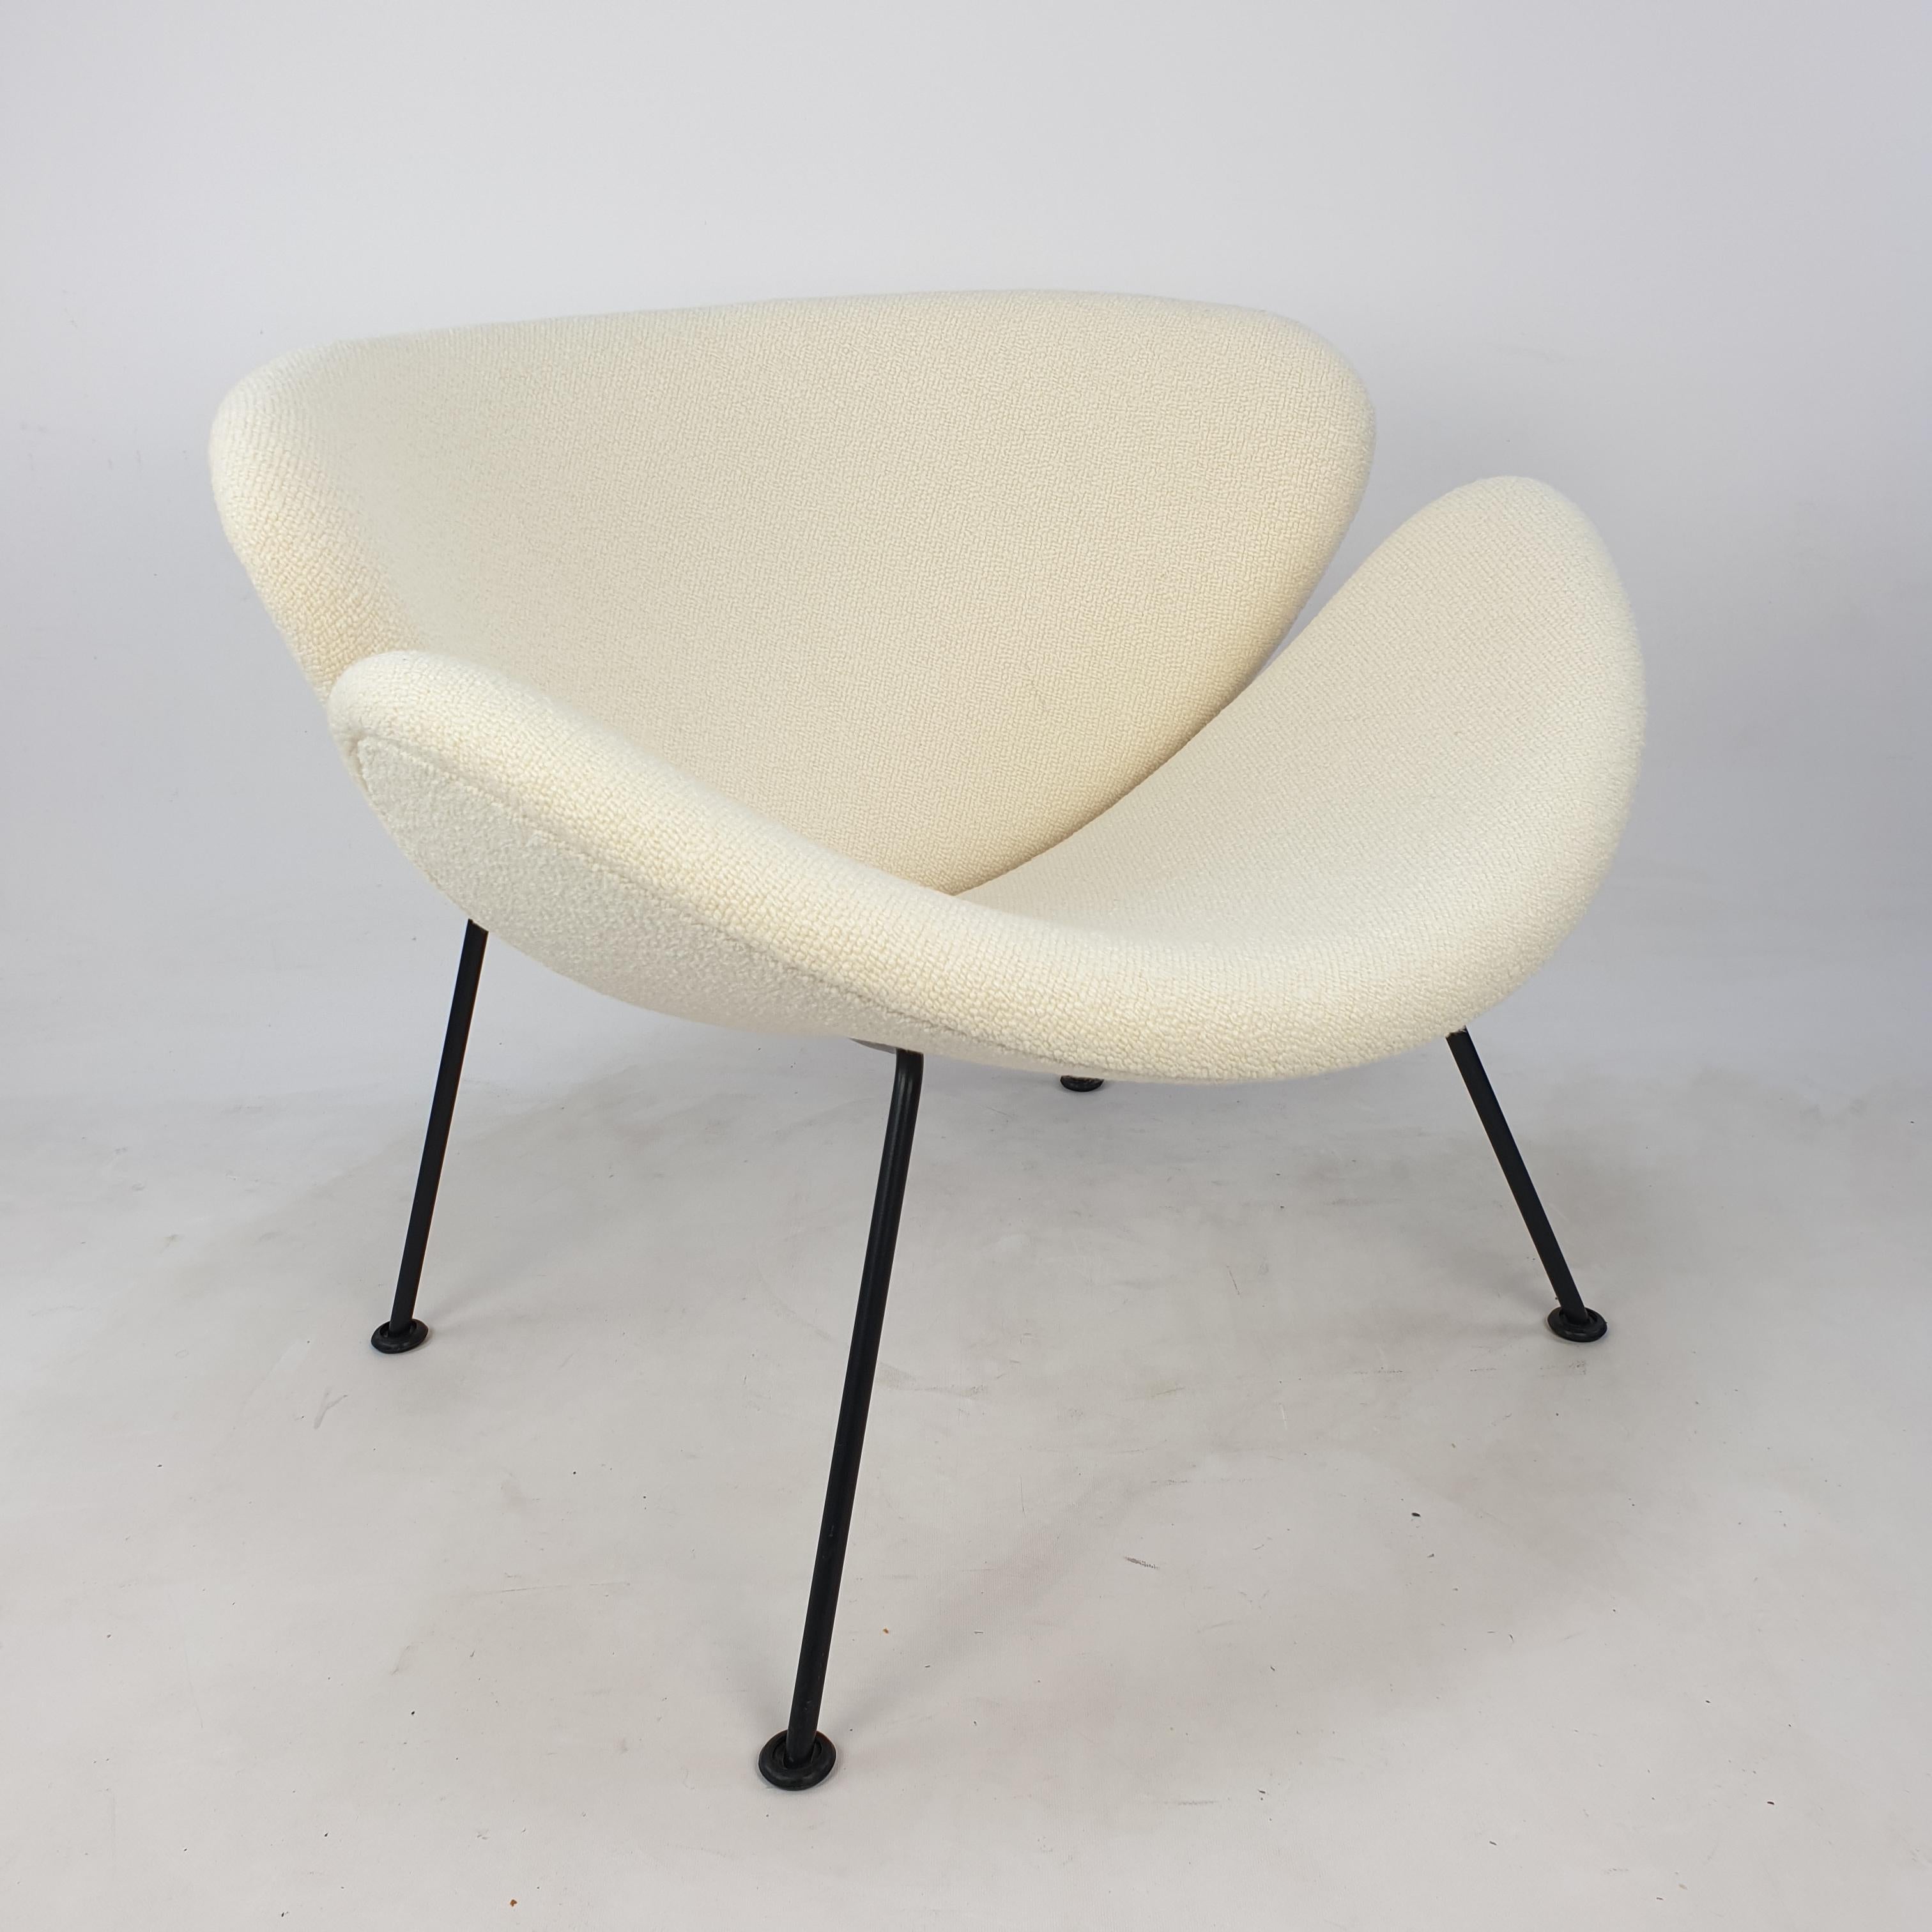 The famous Artifort orange slice chair by Pierre Paulin. Designed in the 60's and produced in the 80's. Cute and very comfortable chair. This is a rare edition with (original) black legs. The chair has new foam and has just been reupholstered with